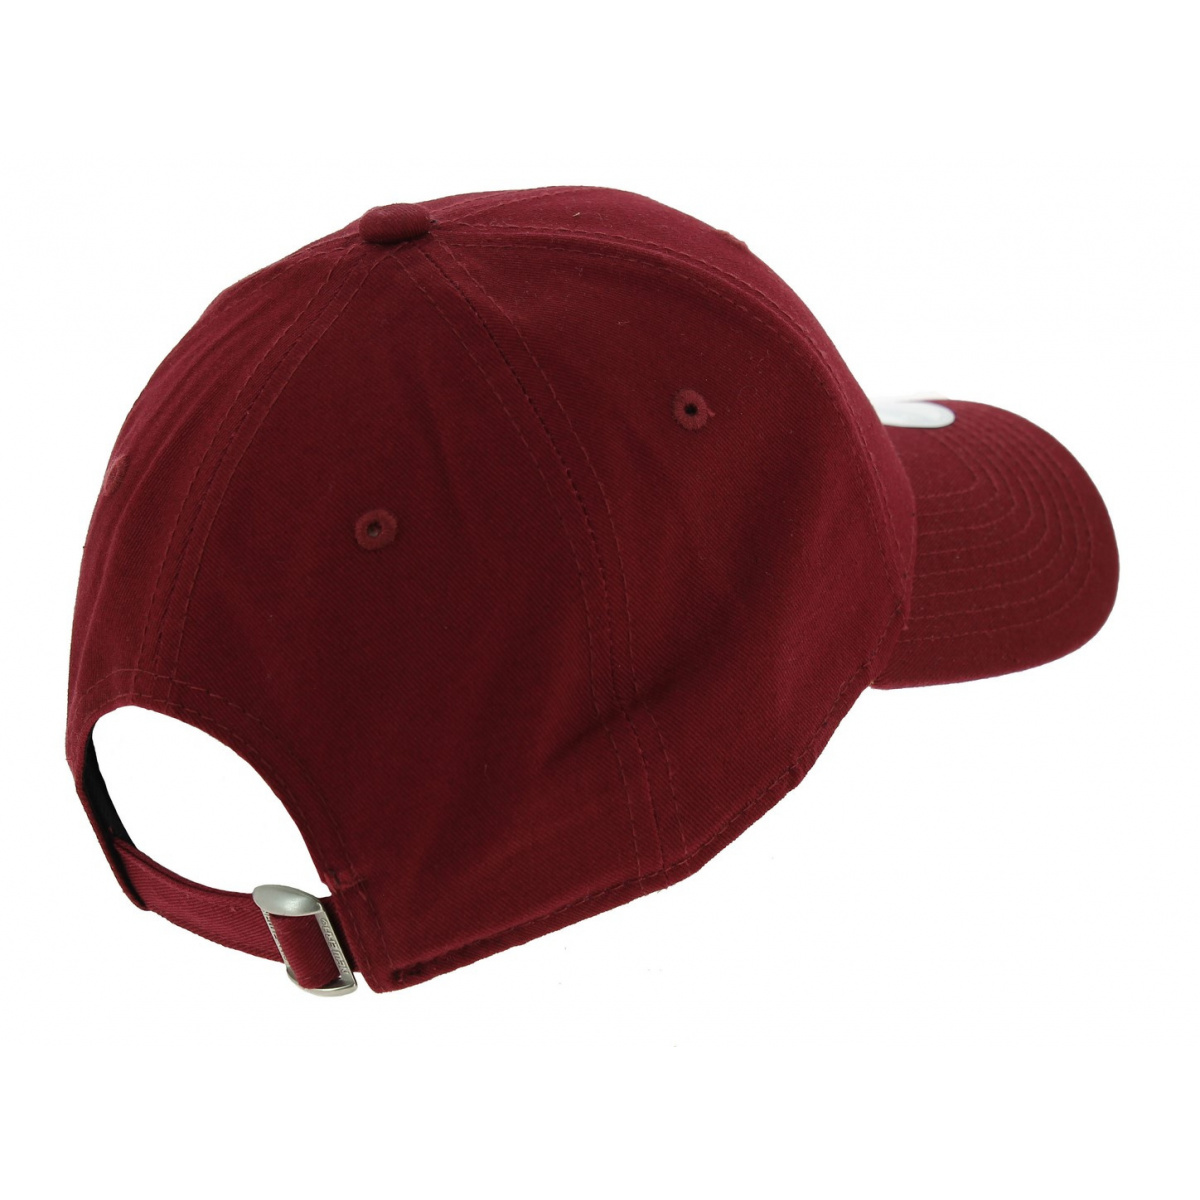 Chapellerie Baseball Cap Era 7716 Bordeaux Essential 940 New : NY Reference | Traclet -